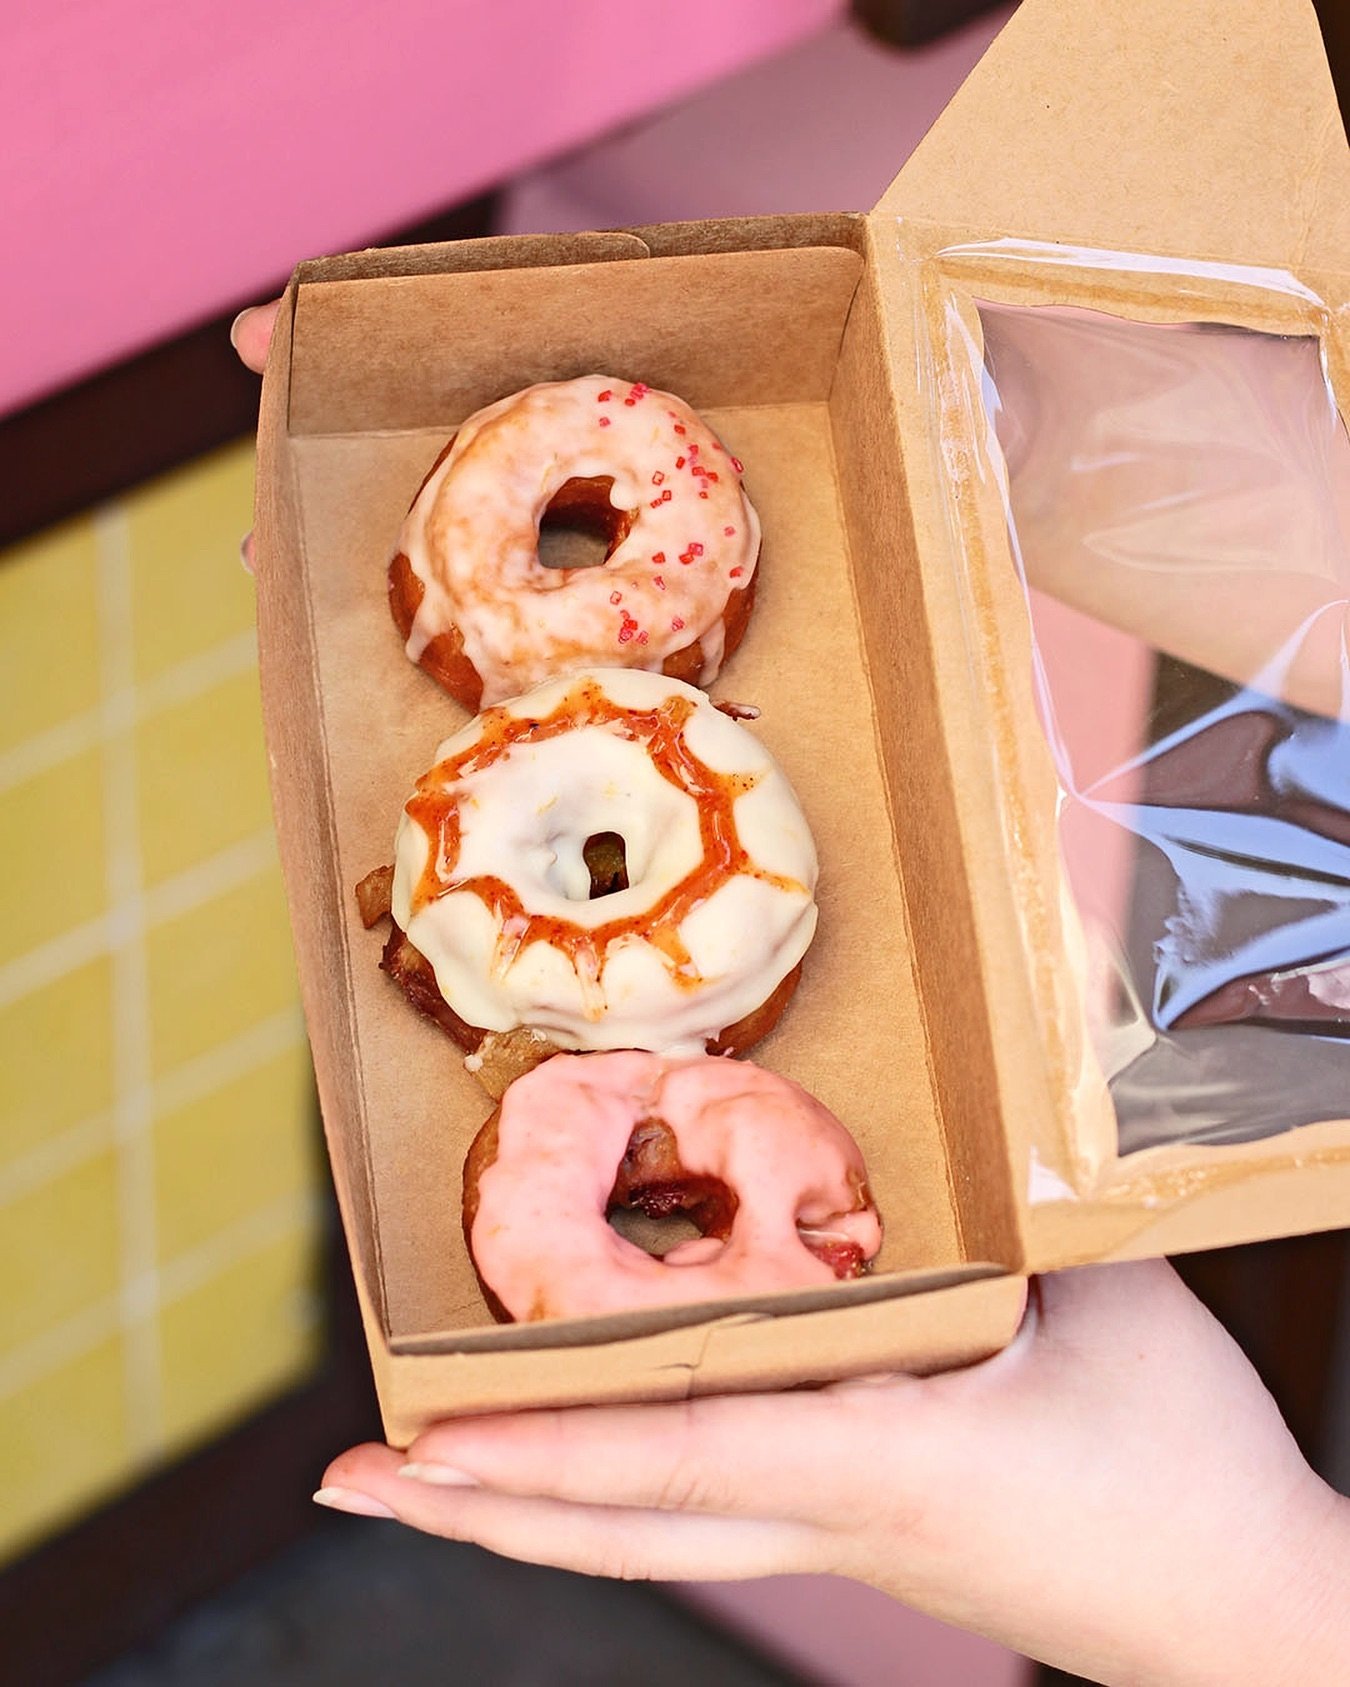 Celebrate Cinco de Mayo with @nosotros 

We&rsquo;re partnering up with @nosotros to offer you a Mini Mezcal Donut Flight! 

Each box will contain the following flavors: 

🍓Strawberry Margarita - Fresh strawberries folded into an orange zest dough. 